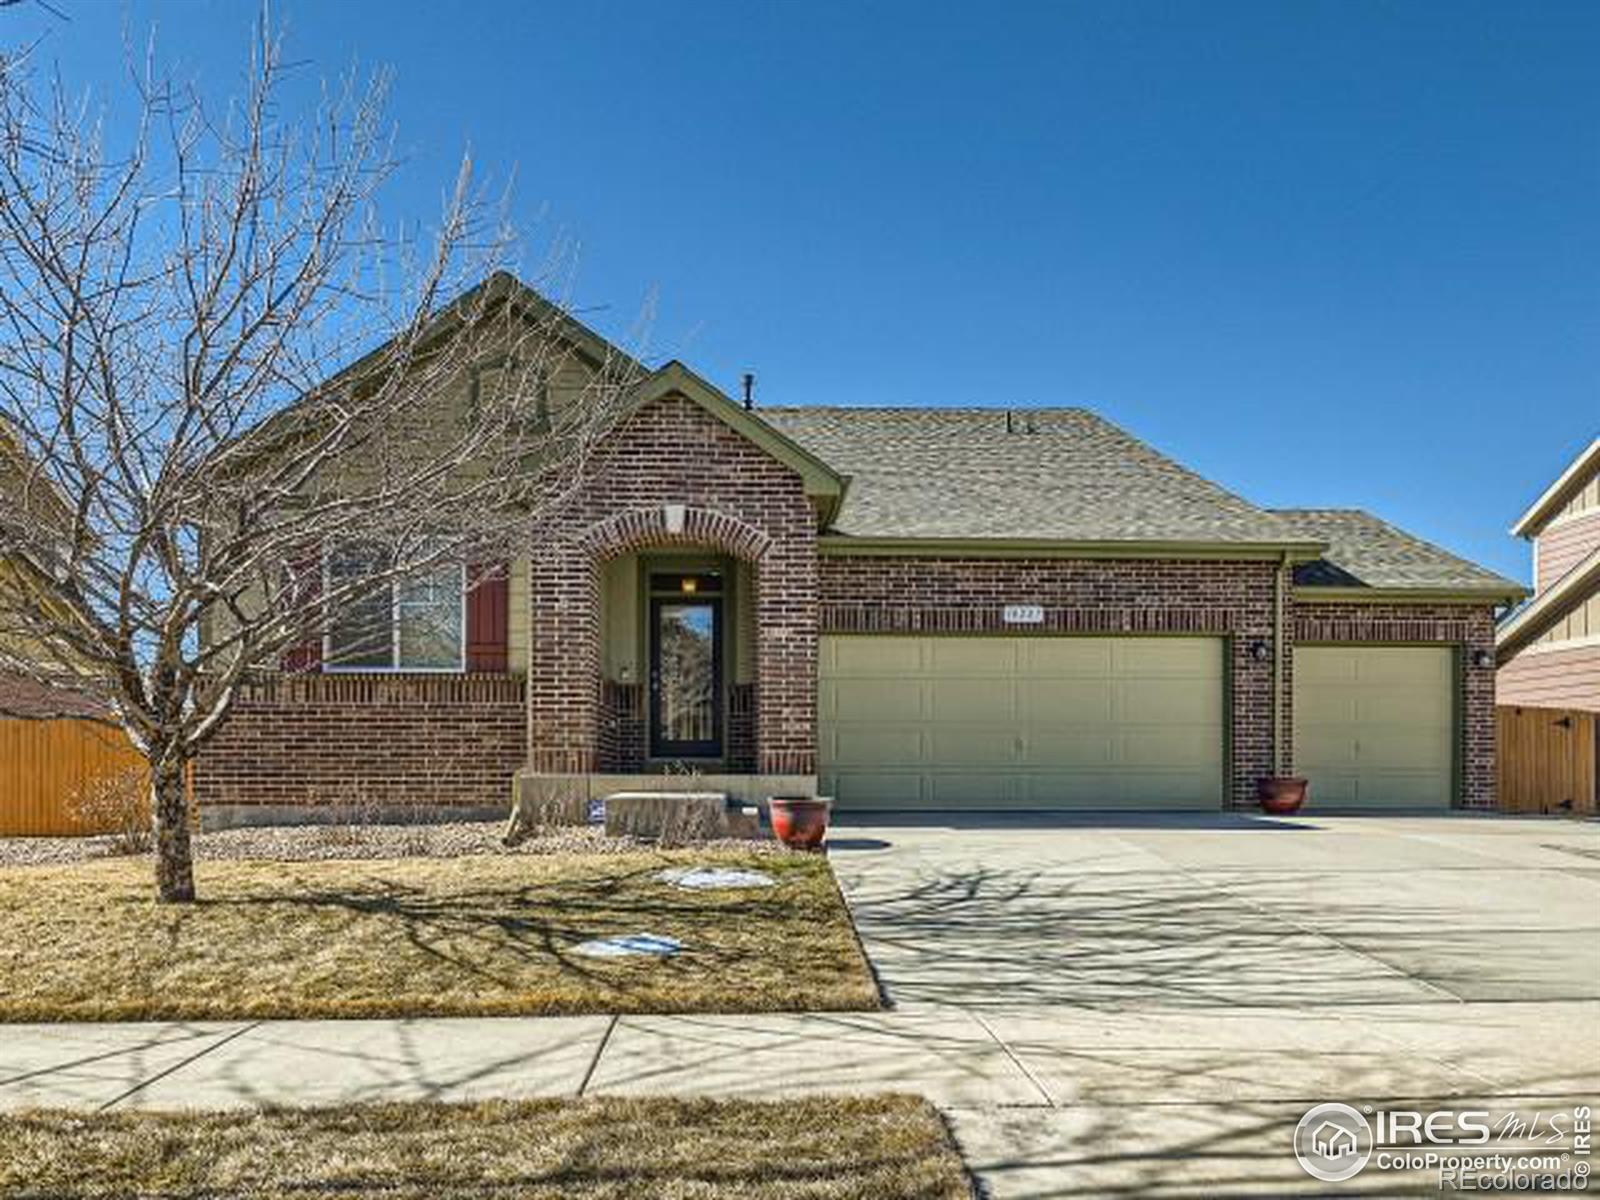 Report Image for 10287  Norfolk Street,Commerce City, Colorado